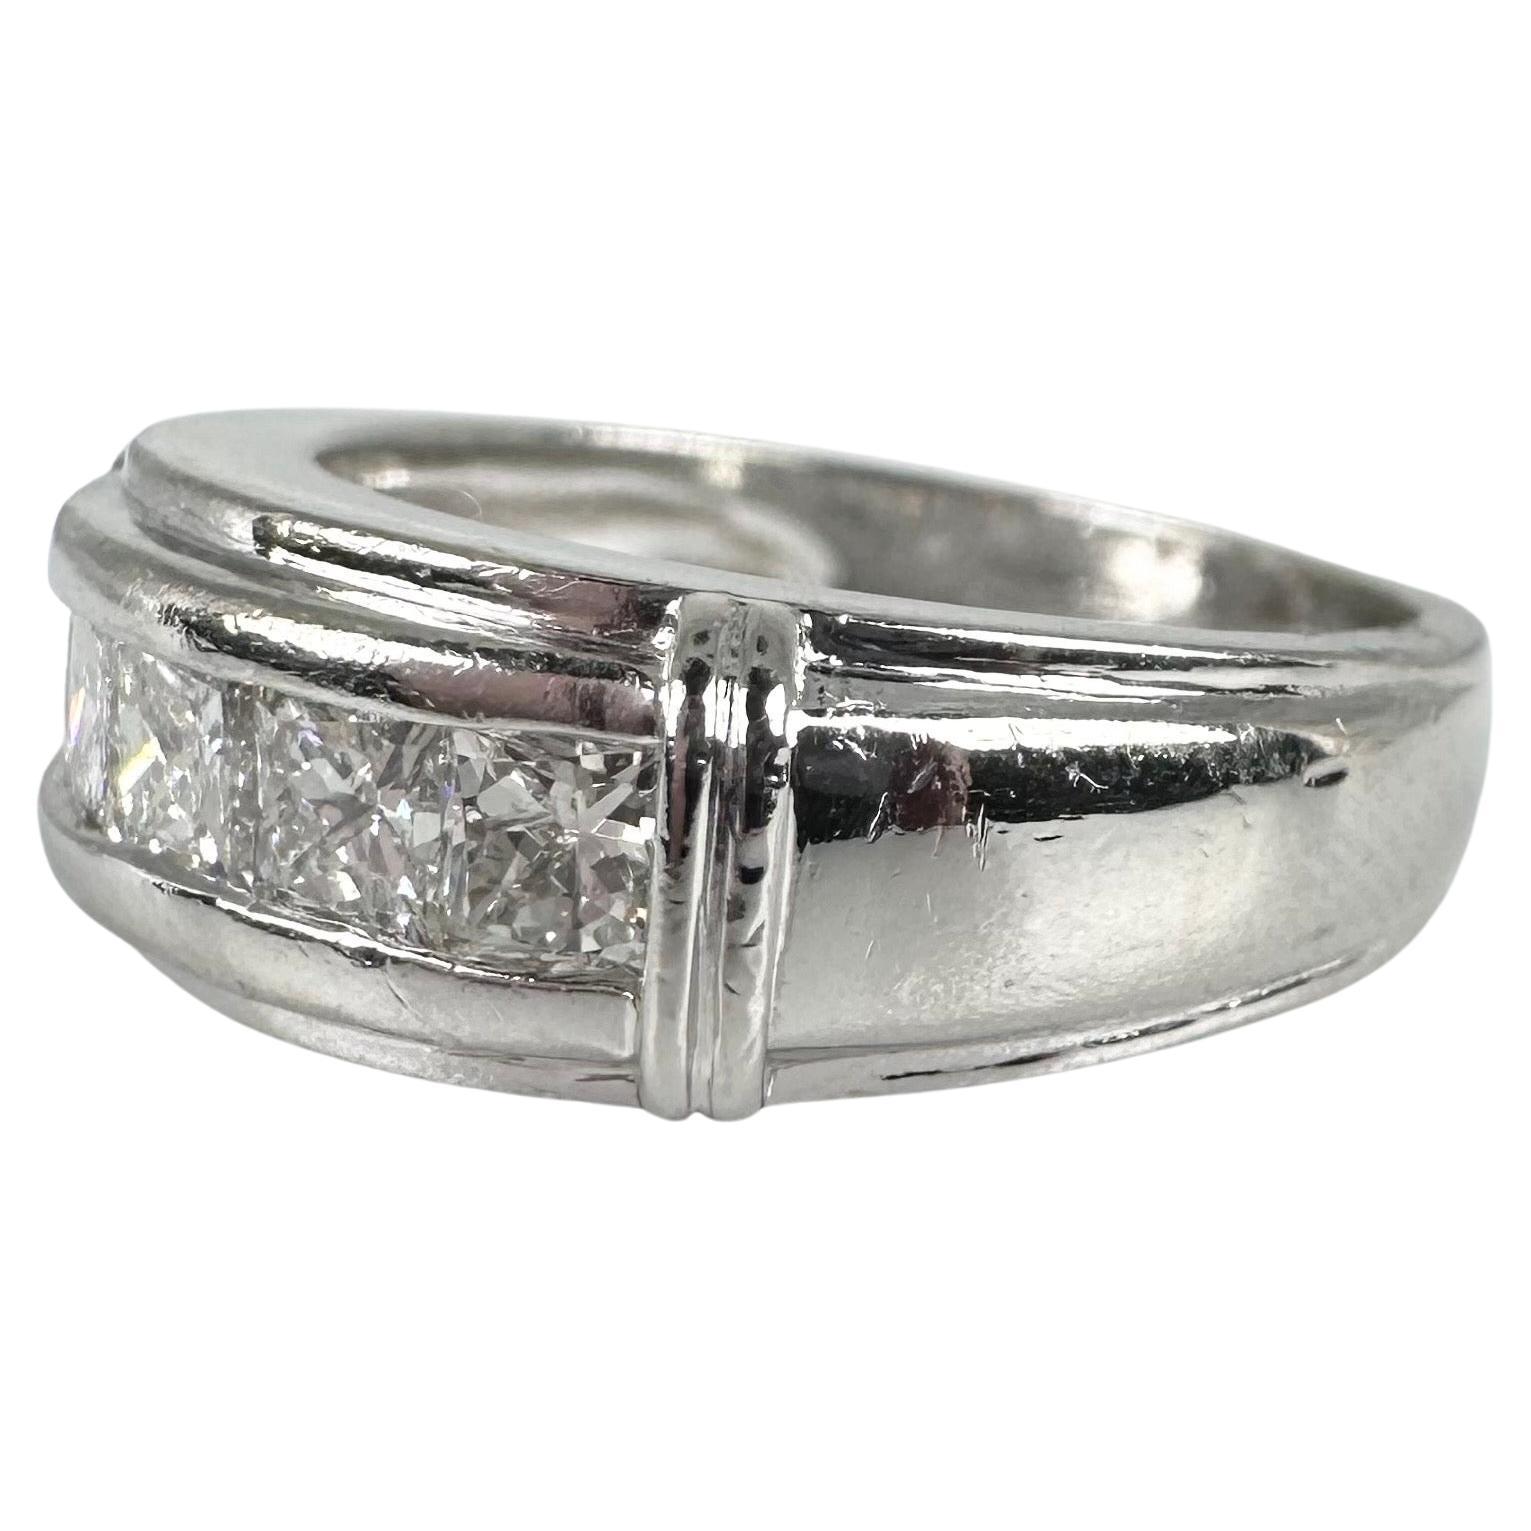 Luxurious wedding band made in platinum with natural diamonds. This ring is grand at over 8 grams and looks very substantial when on finger.

METAL: PLATINUM
NATURAL DIAMOND(S)
Clarity/Color: VS/G
Carat:0.75ct
Cut:Princess Cut